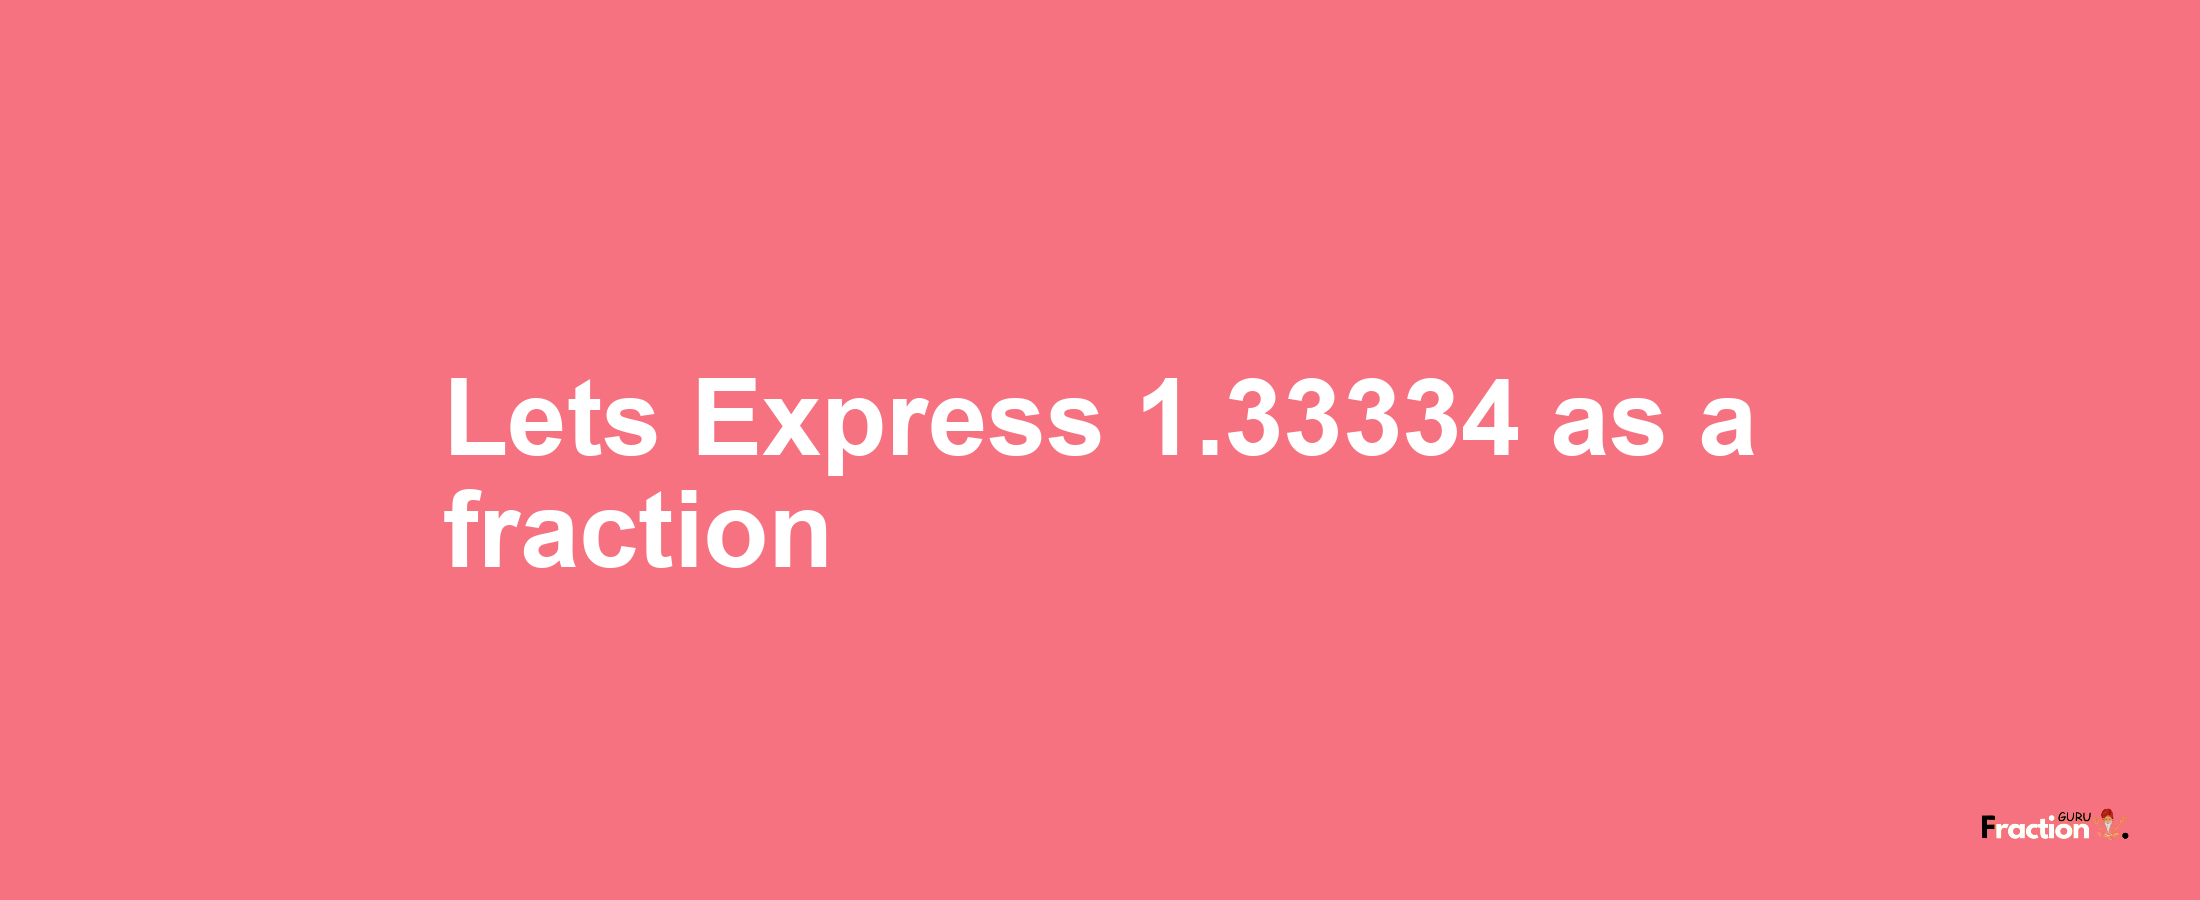 Lets Express 1.33334 as afraction